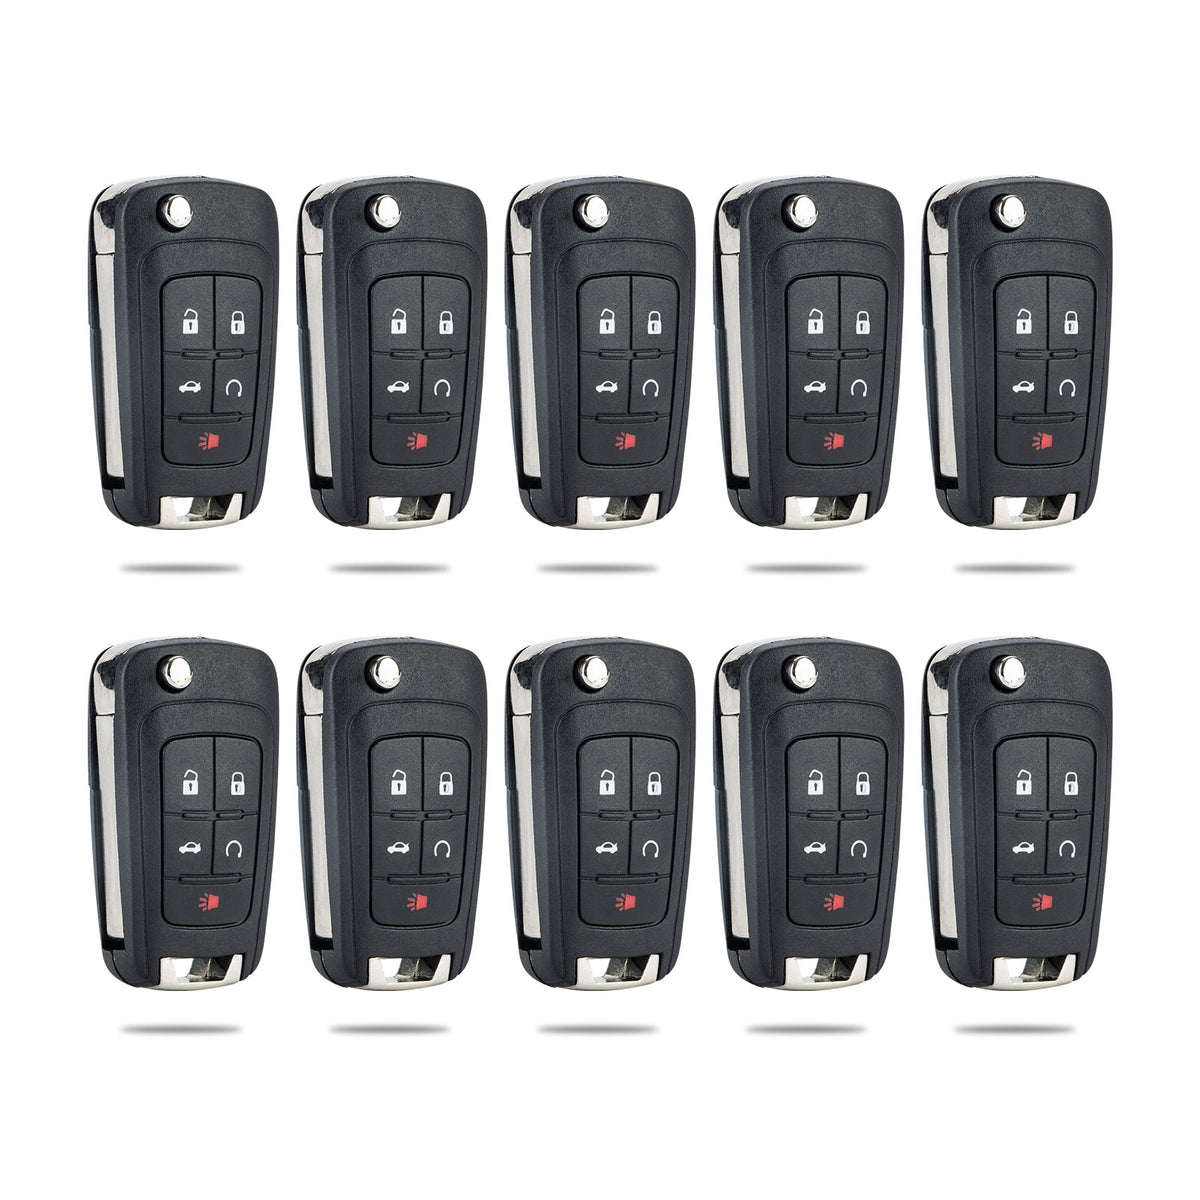 Lots of 10 Extra-Partss Remote Car Key Fob Replacement for Chevy OHT01060512 5-btn fits 2014 2015 2016 2017 2018 2019 Camaro Equinox Impala